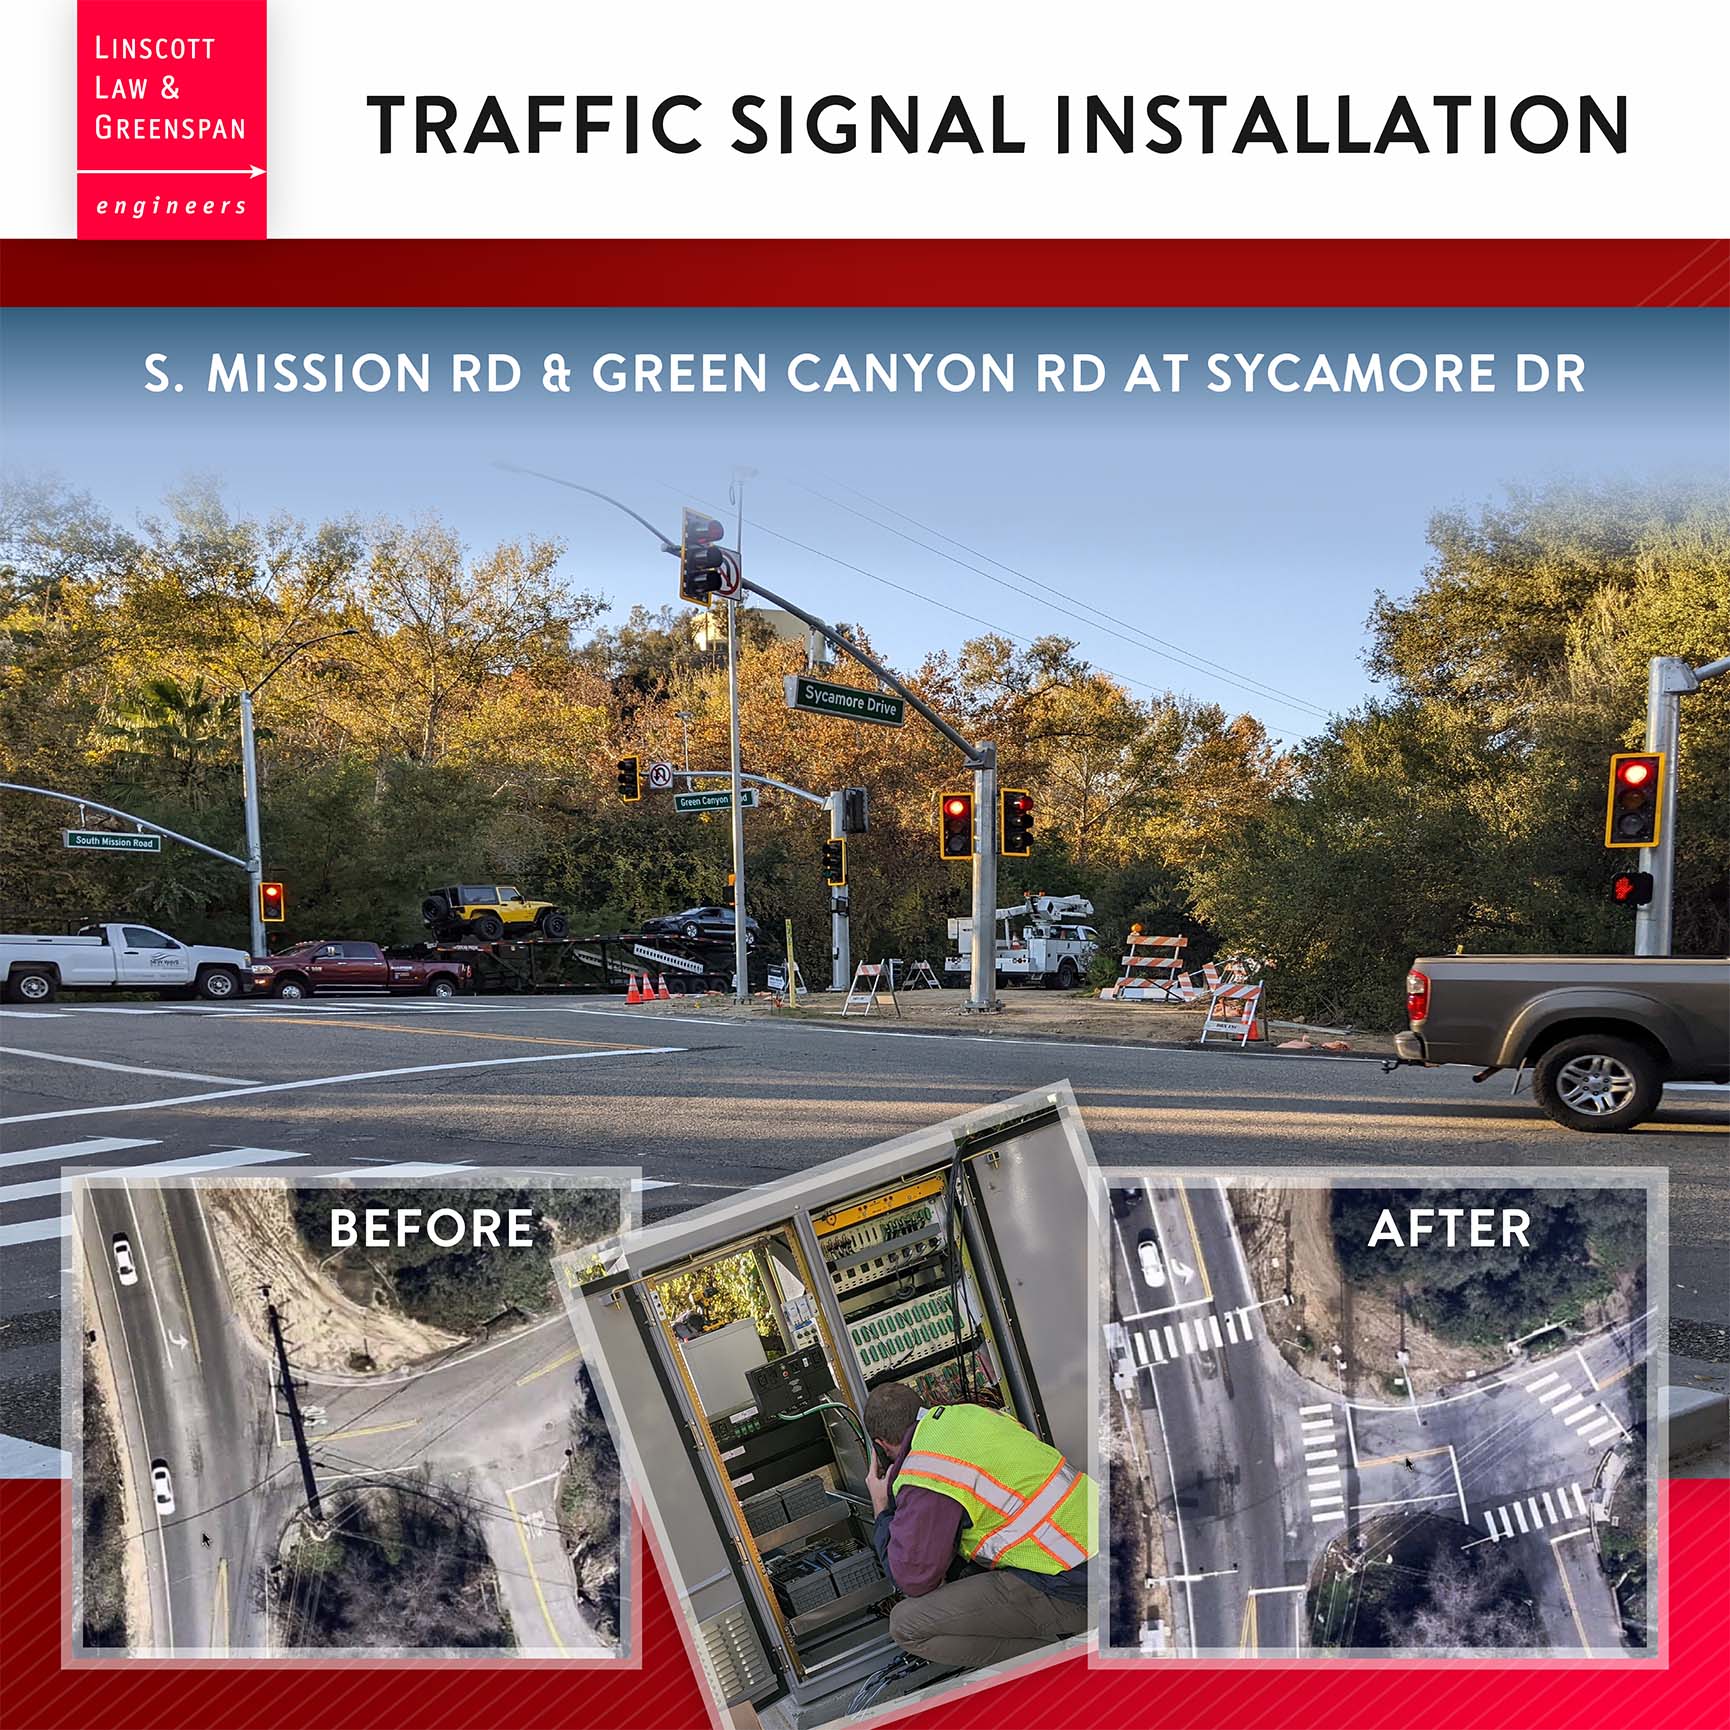 LLG - S. Mission Road & Green Canyon Road and Sycamore Drive